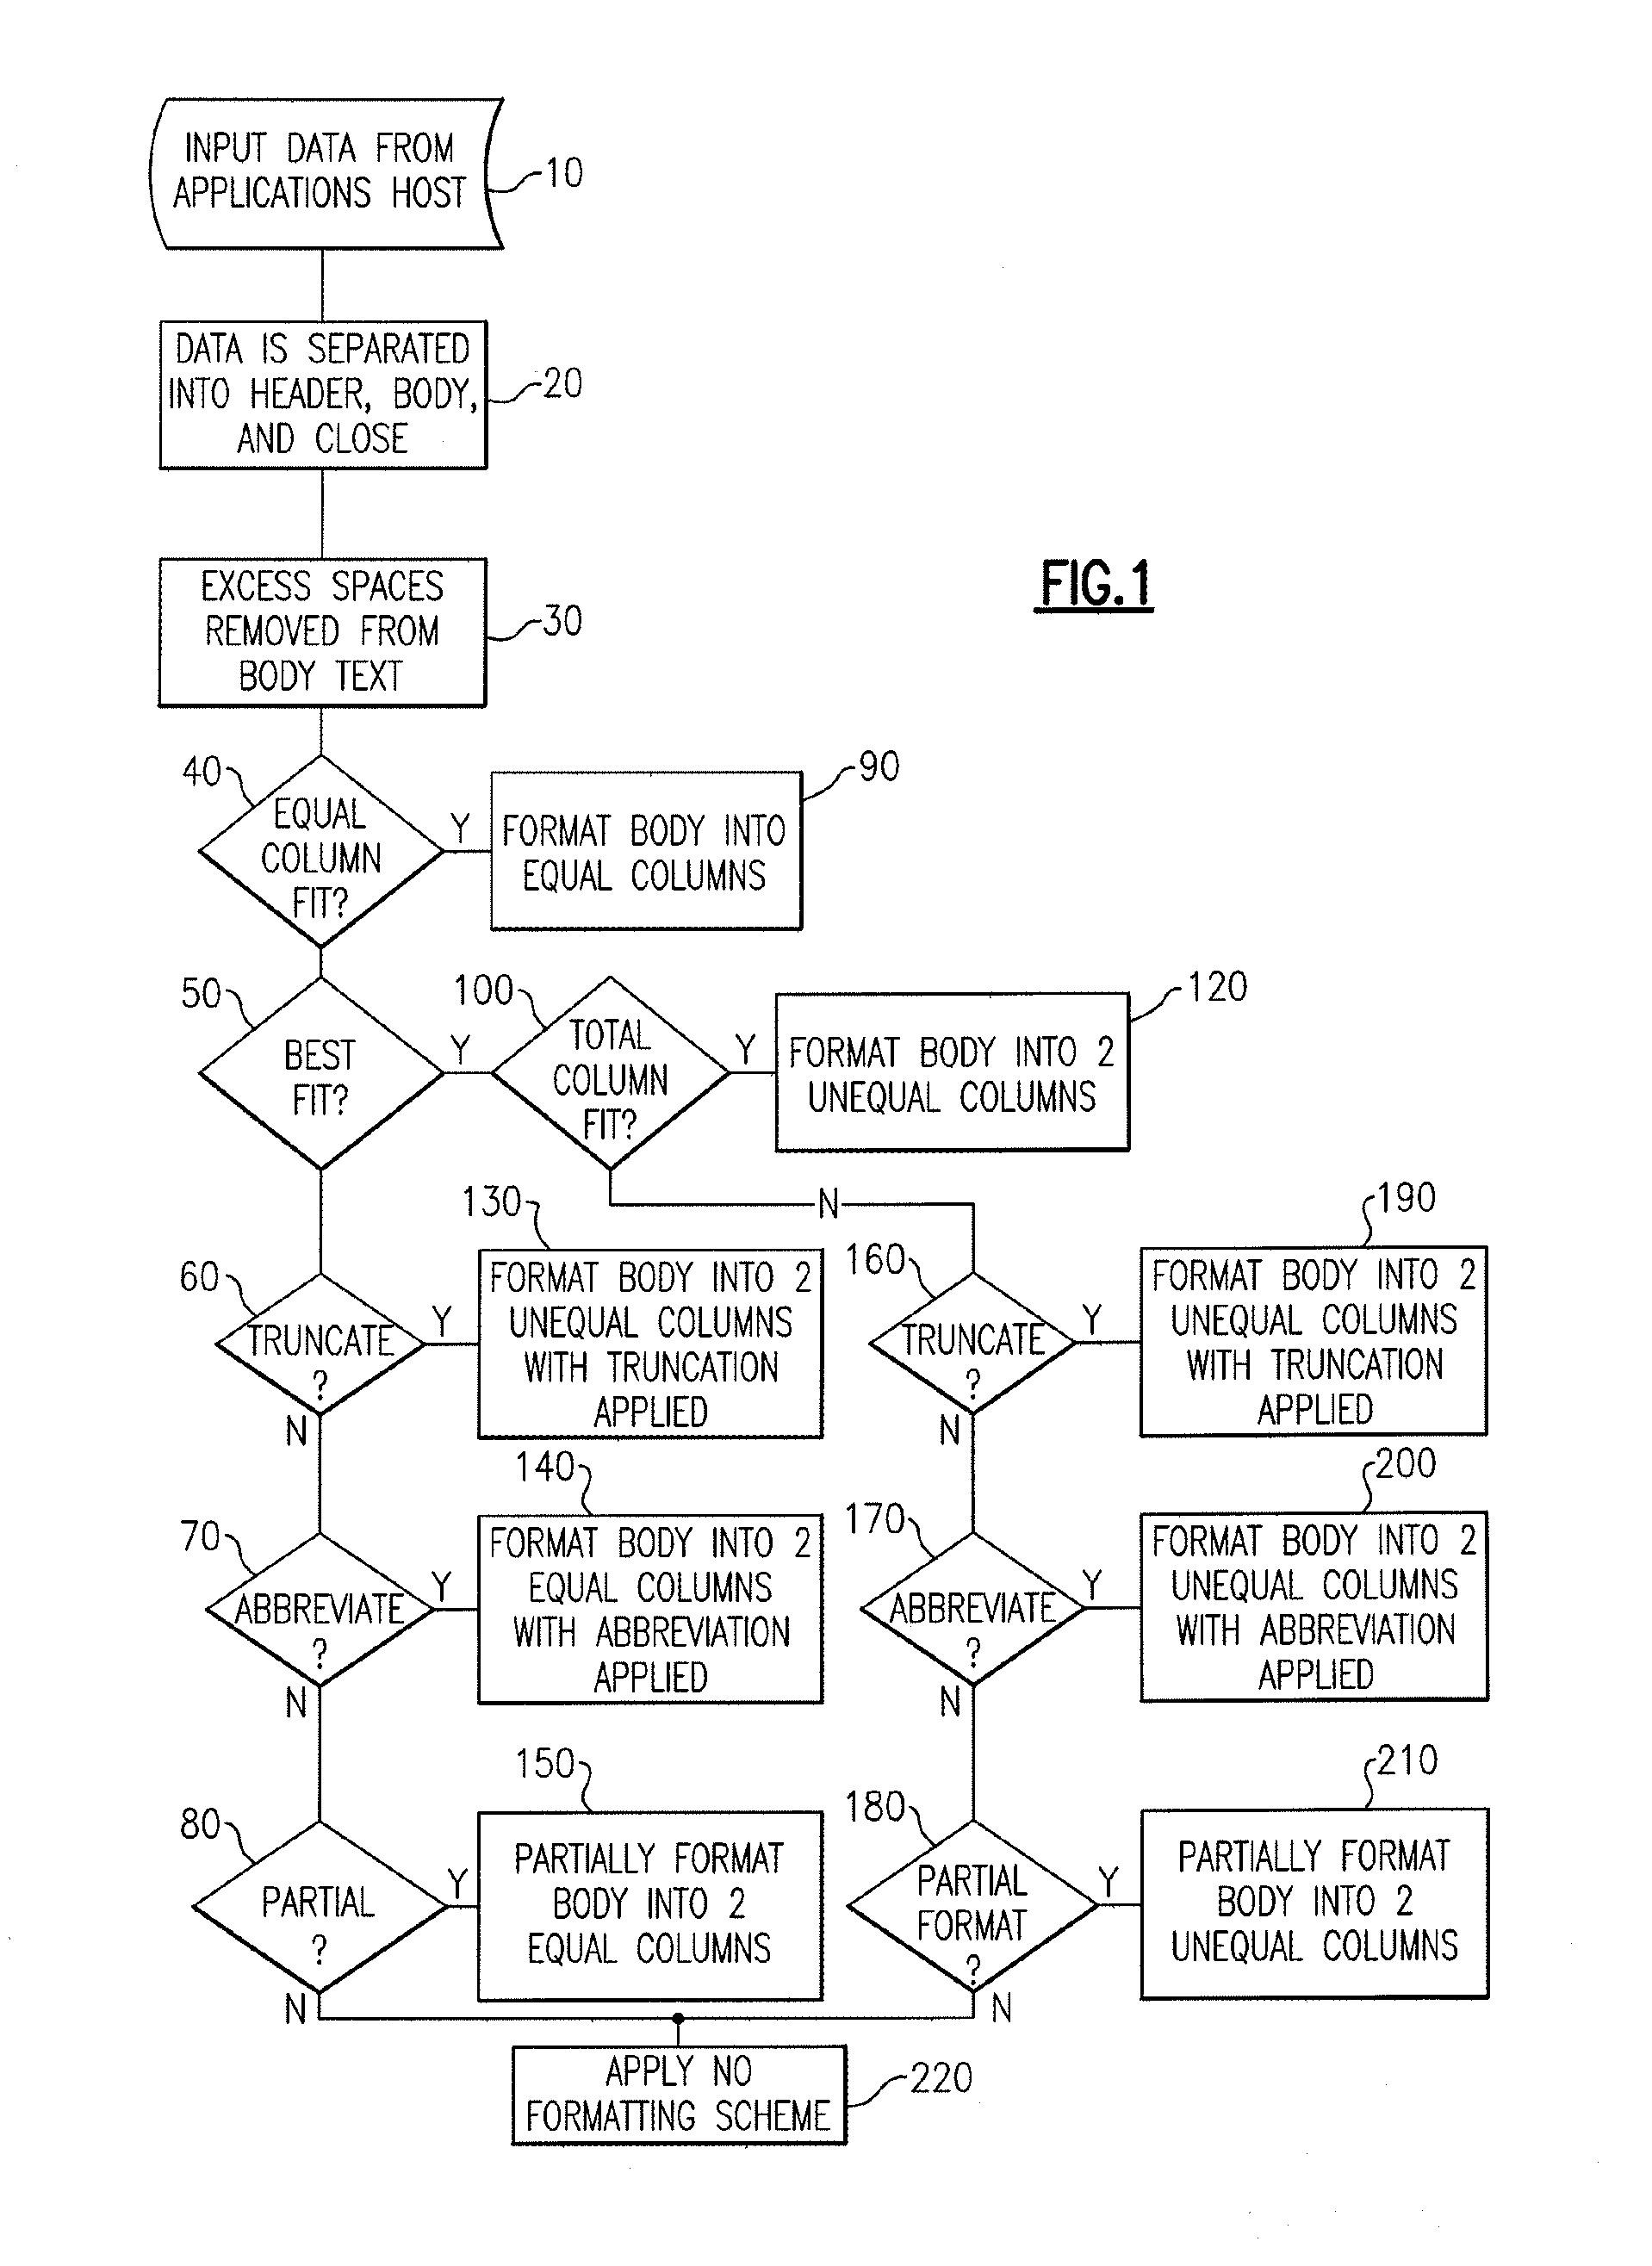 System and Method for Conserving Receipt Paper on a Transaction Receipt